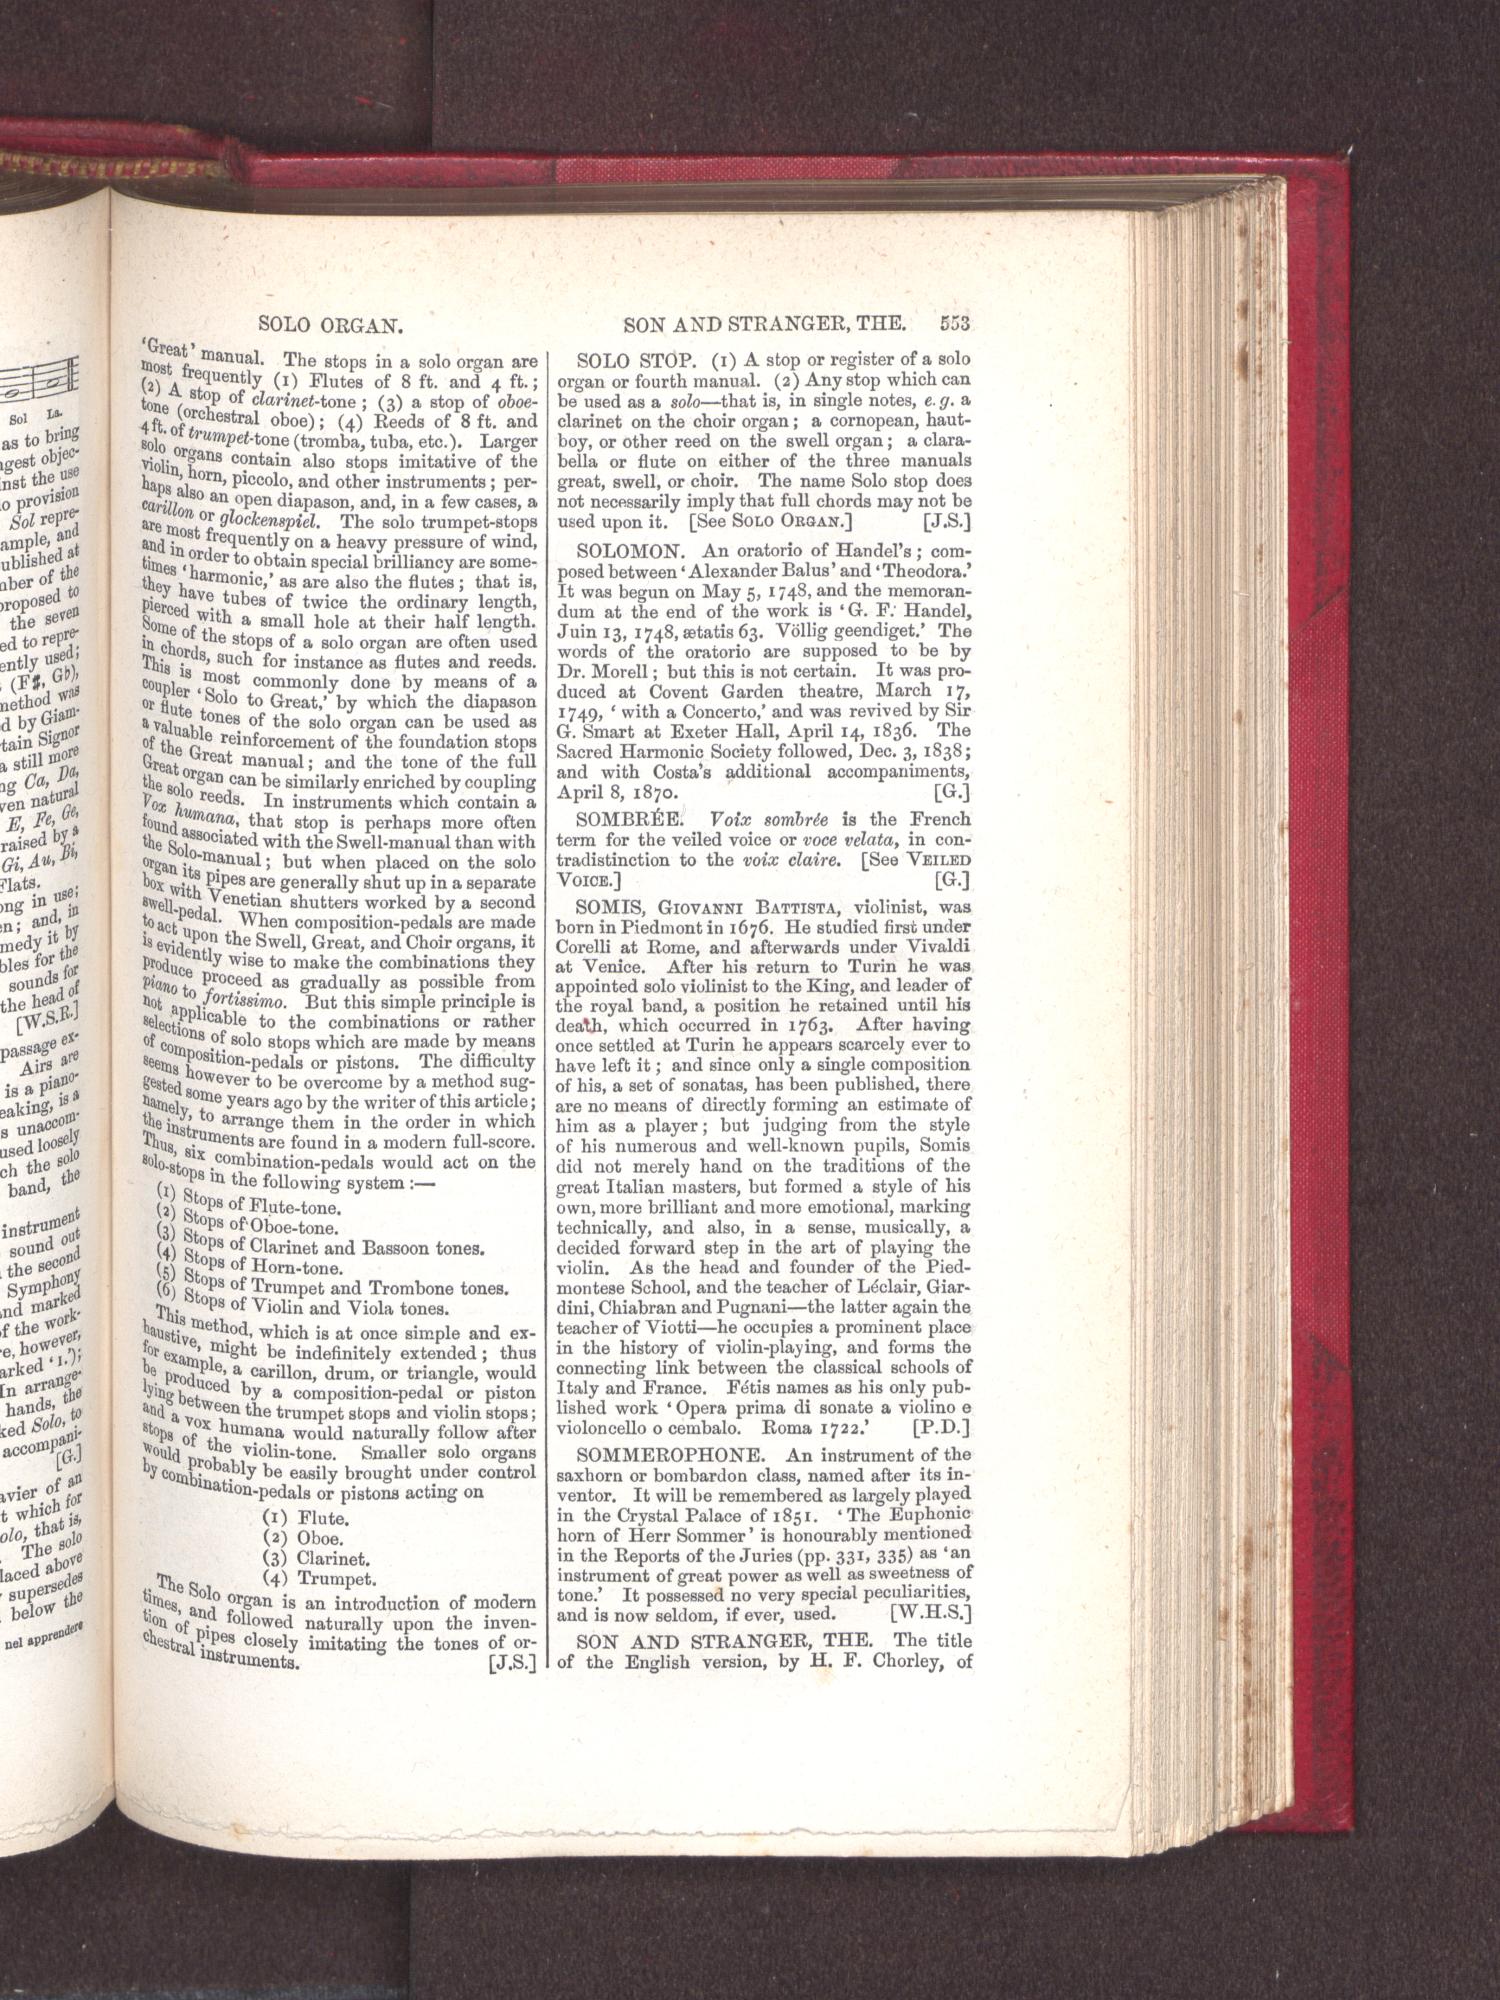 Dictionary Of Music And Musicians Volume 3 Page 553 Unt Digital Library